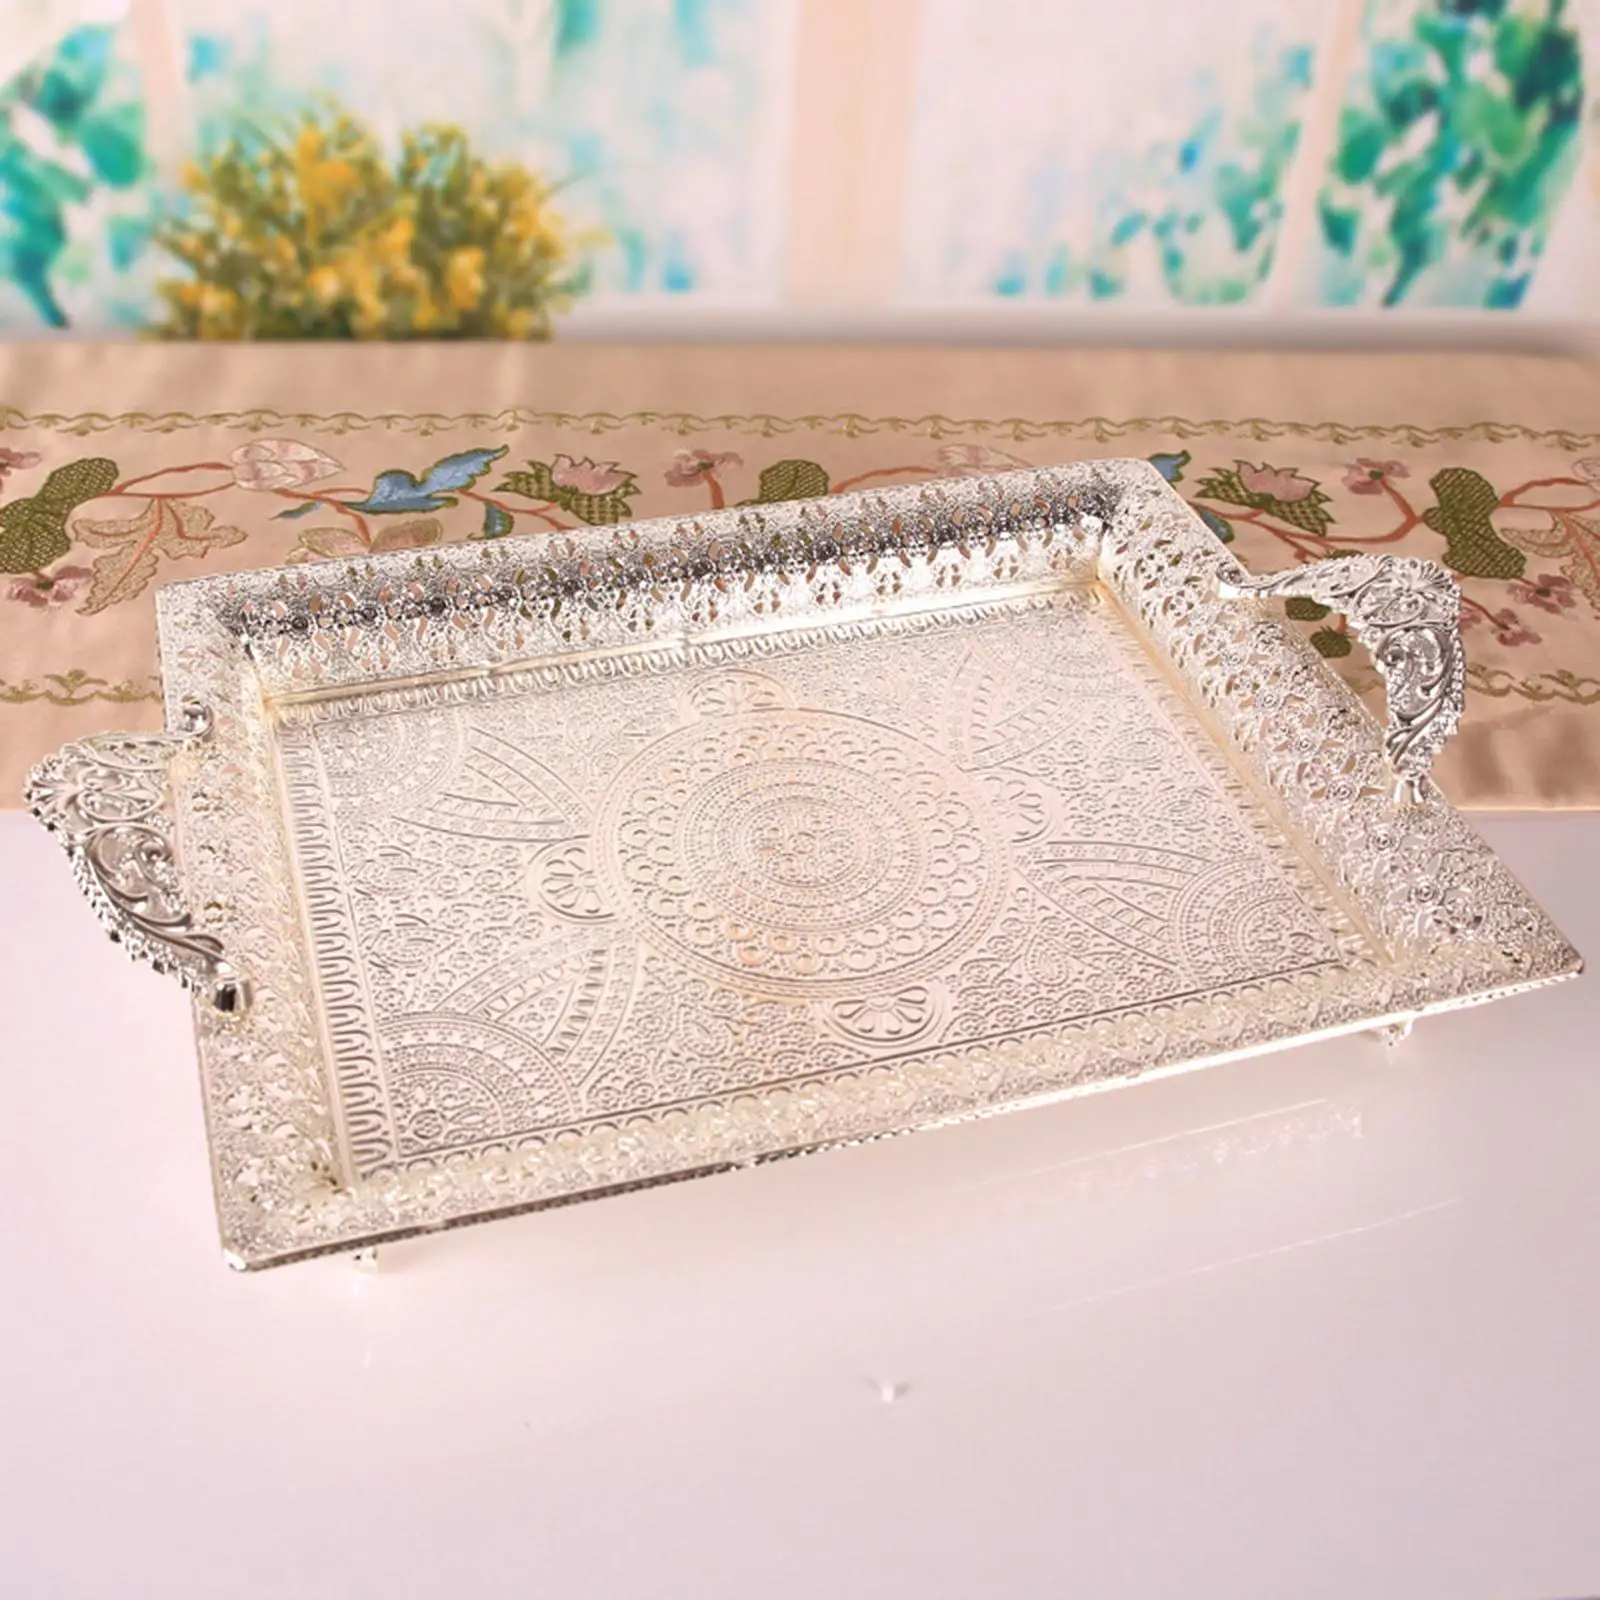 Iron Serving Tray, Bread Tray Display Tray Fruit Plate Jewelry Tray Makeup Organizer for Bathroom Dressing Room Party Decoration